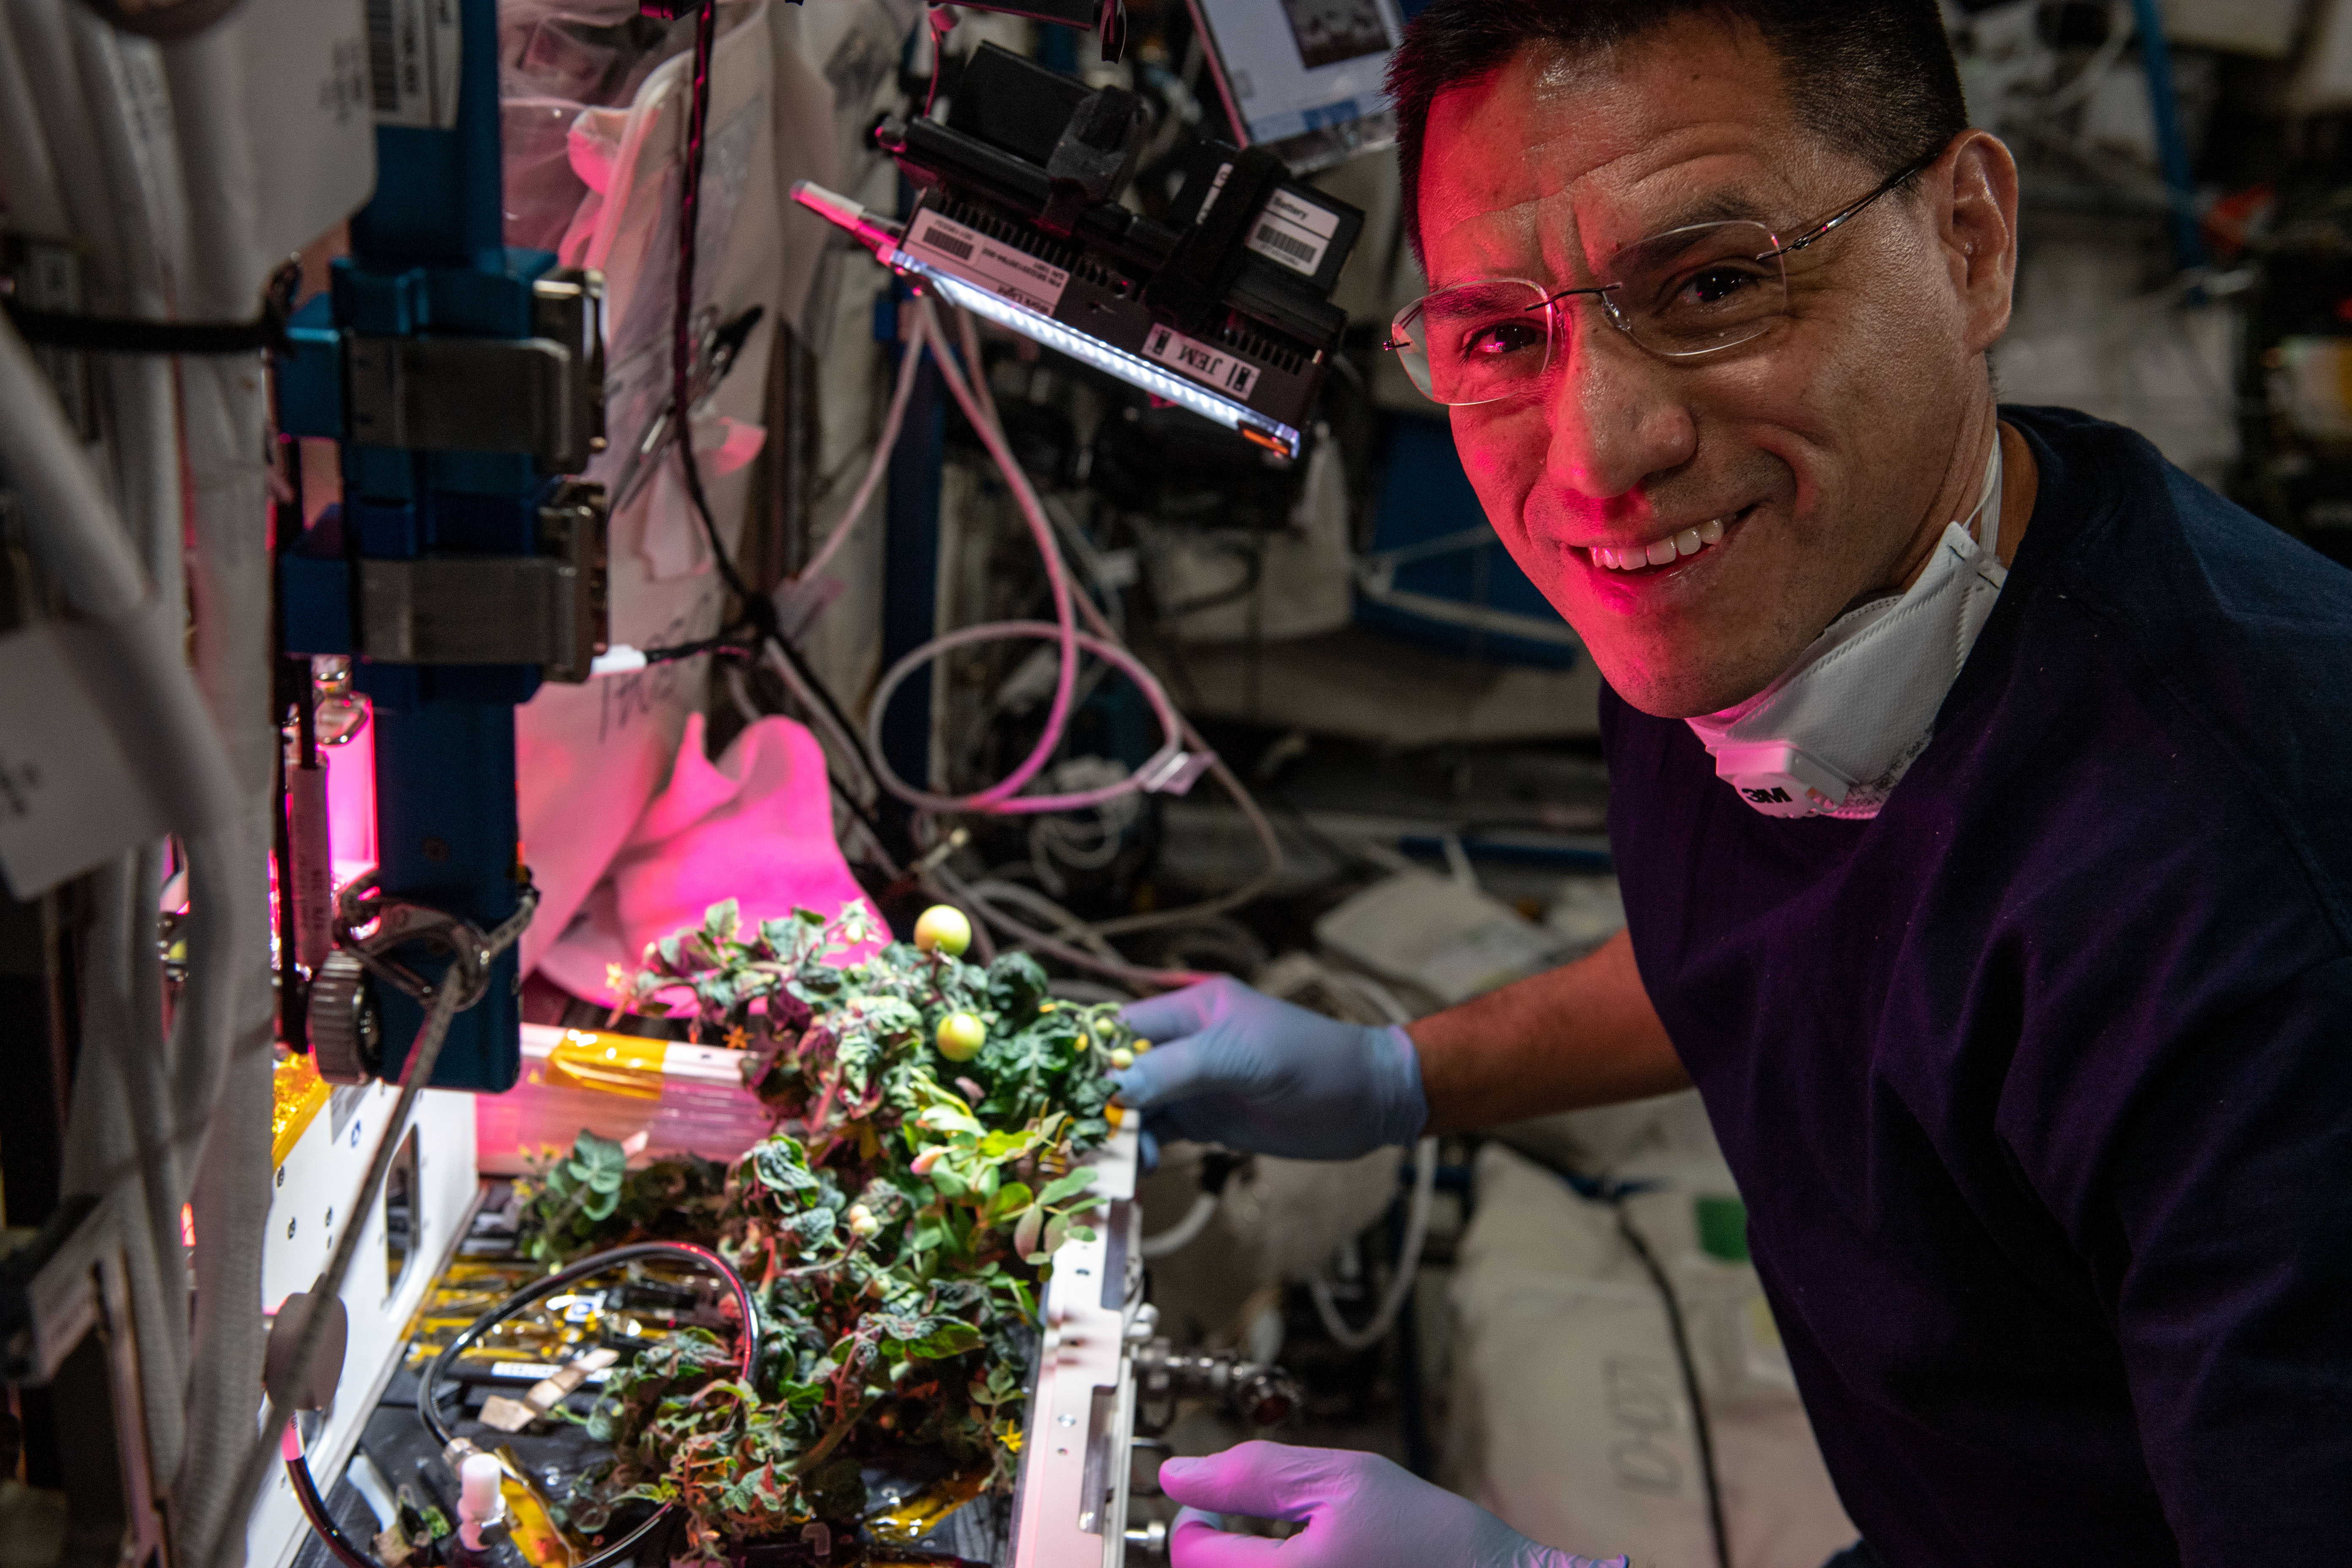 NASA astronaut and Expedition 68 Flight Engineer Frank Rubio is photographed performing fluid management and seed cartridge/plant inspections on the eXposed Root On-Orbit Test System (XROOTS) payload.